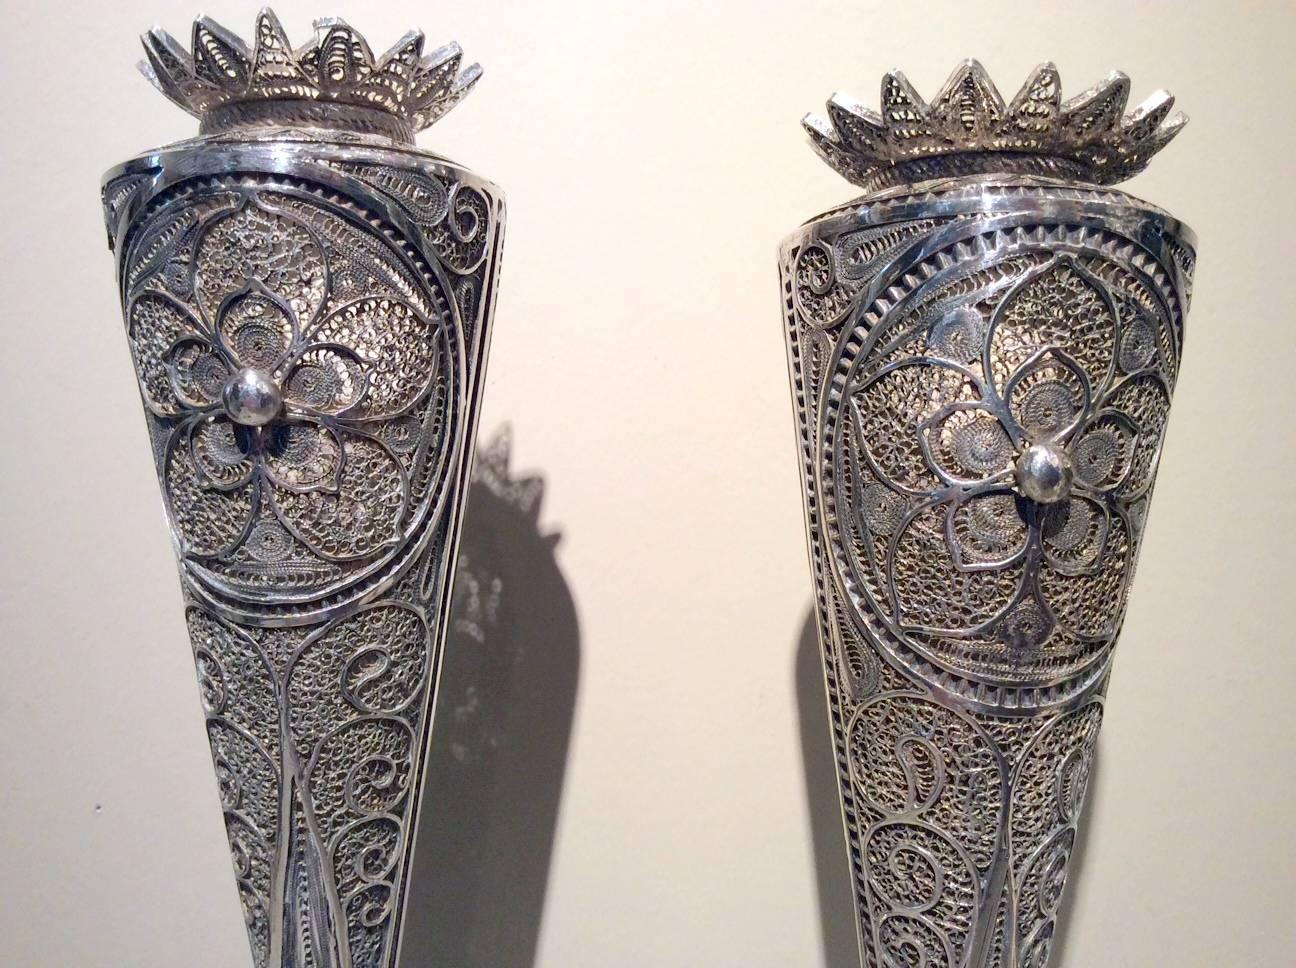 Pair of silver candlesticks decorated filigree work stylized floral motifs in scrolls and swirls.
Oriental work of the early 20th century. (Iran or Middle east).
Candleholders are missing.